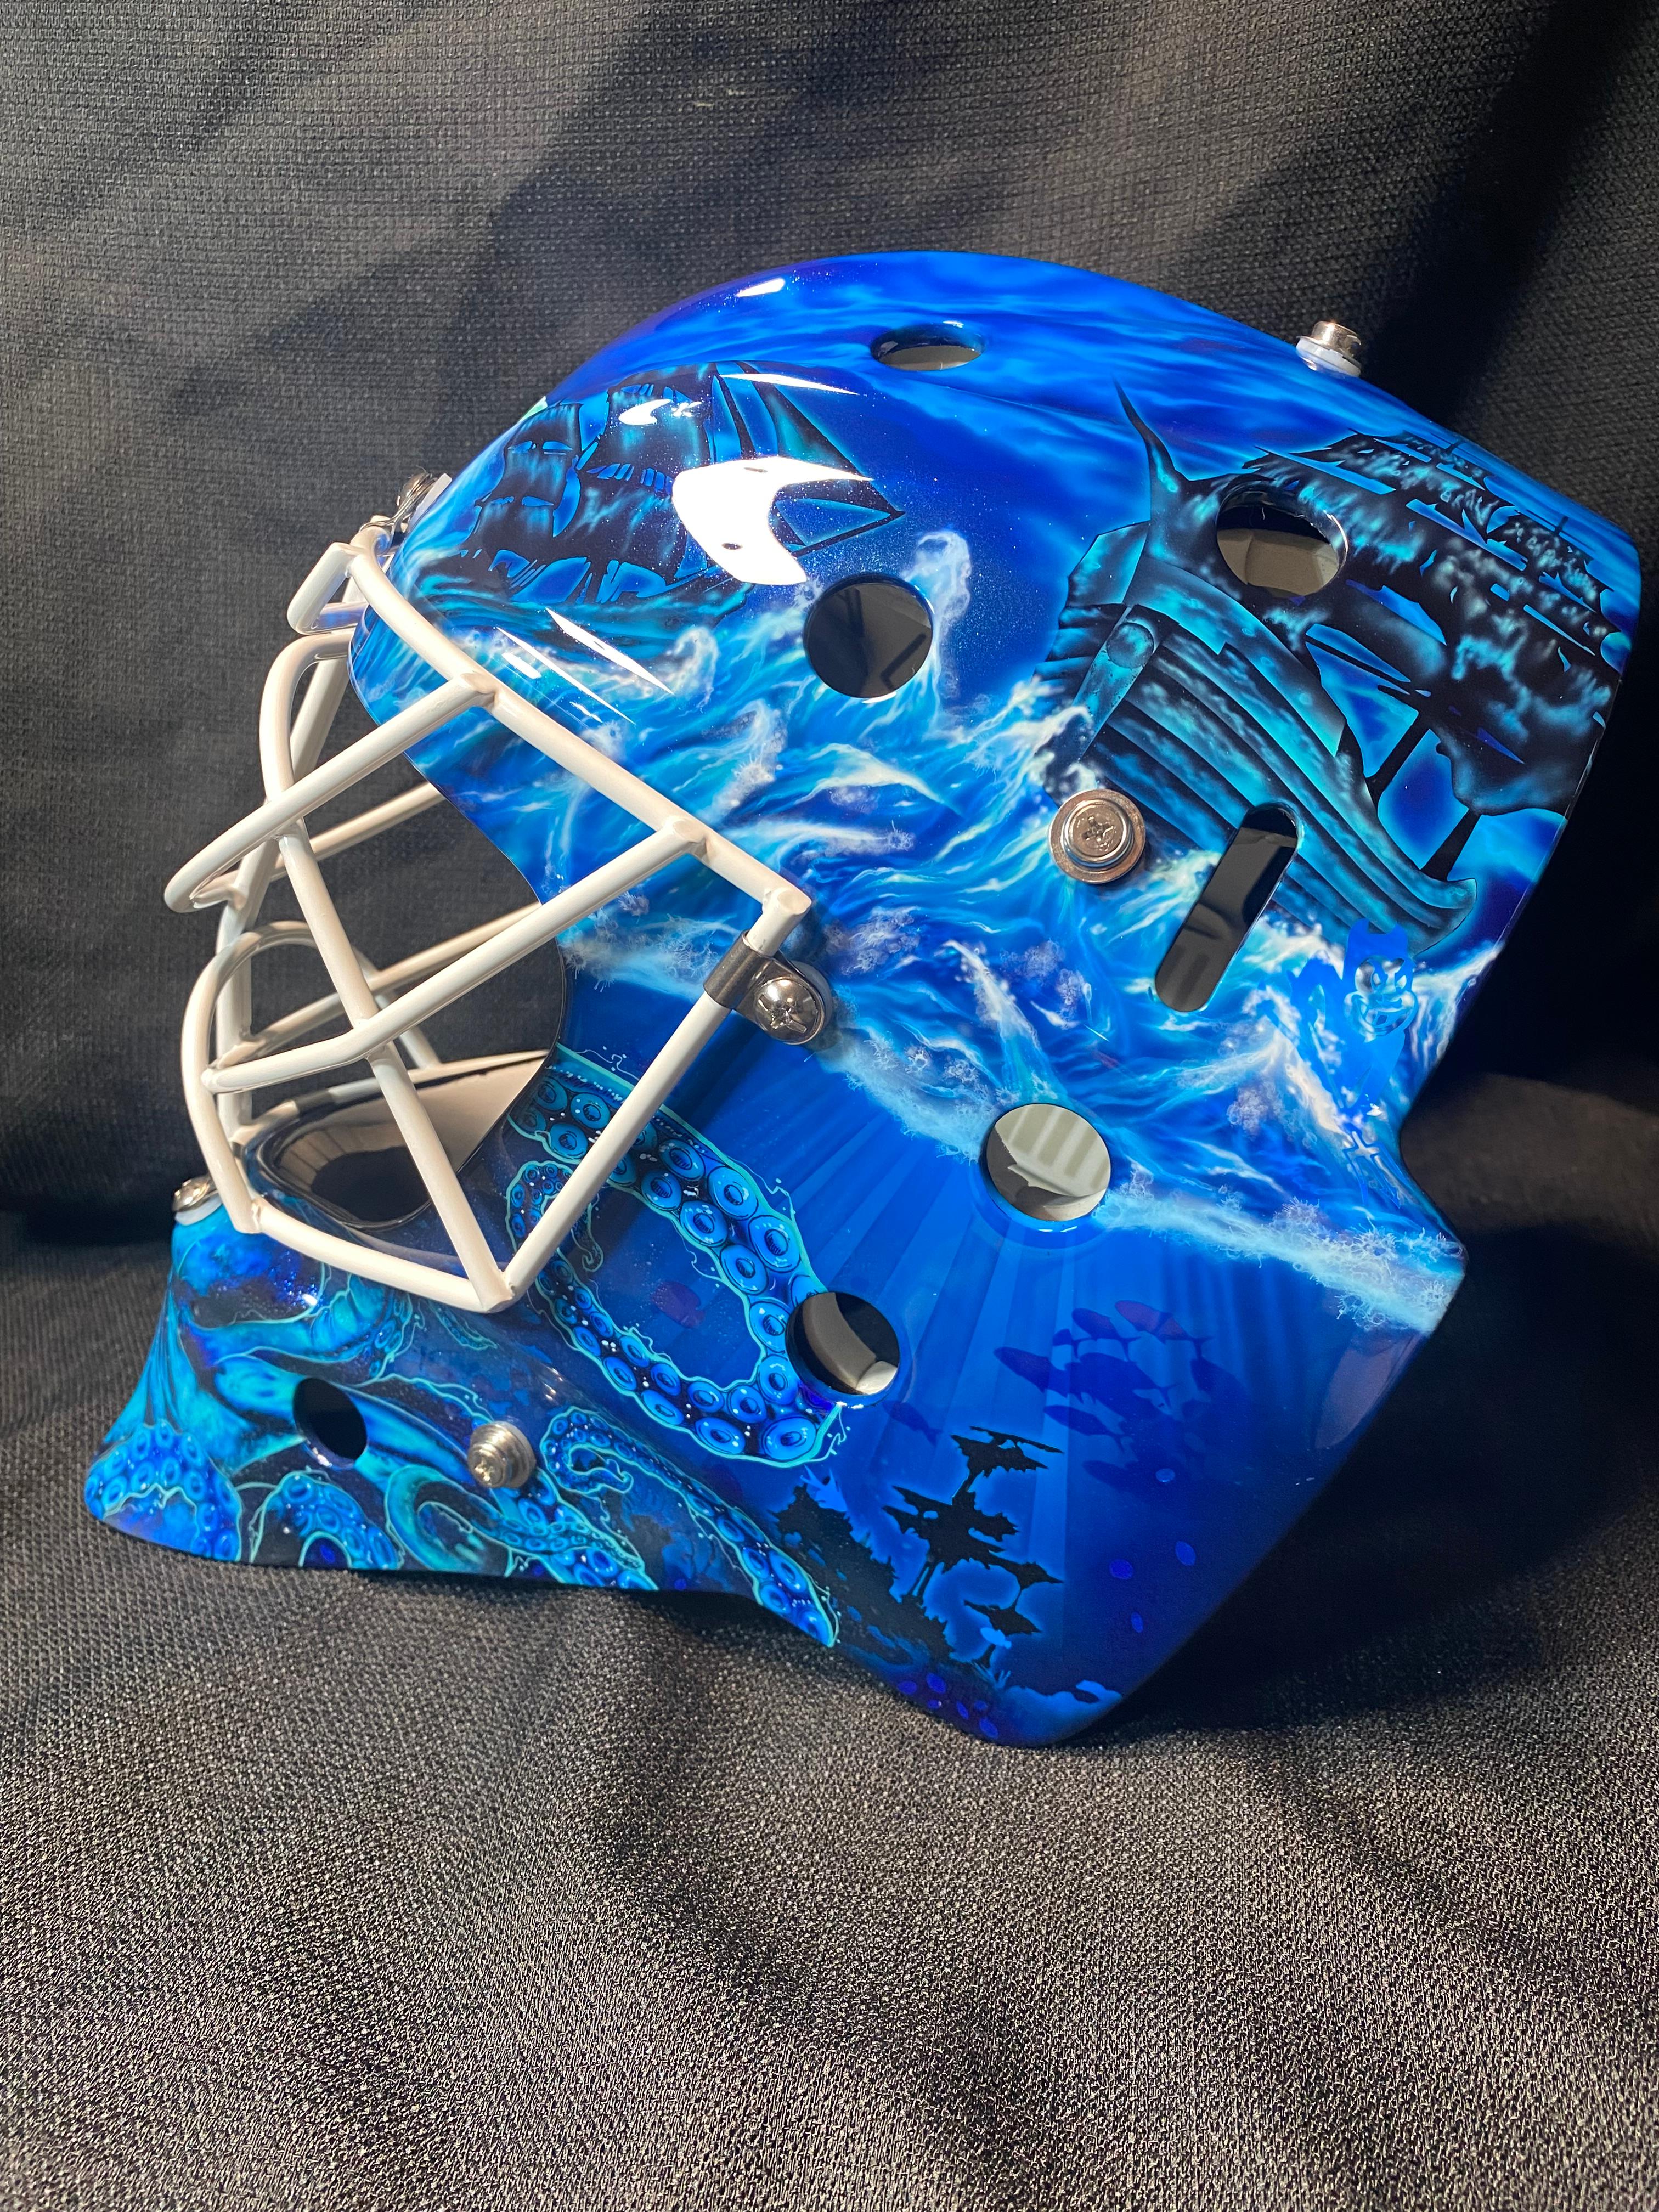 NHL on X: Joey Daccord's (@JDac35) new mask for the 2022-23